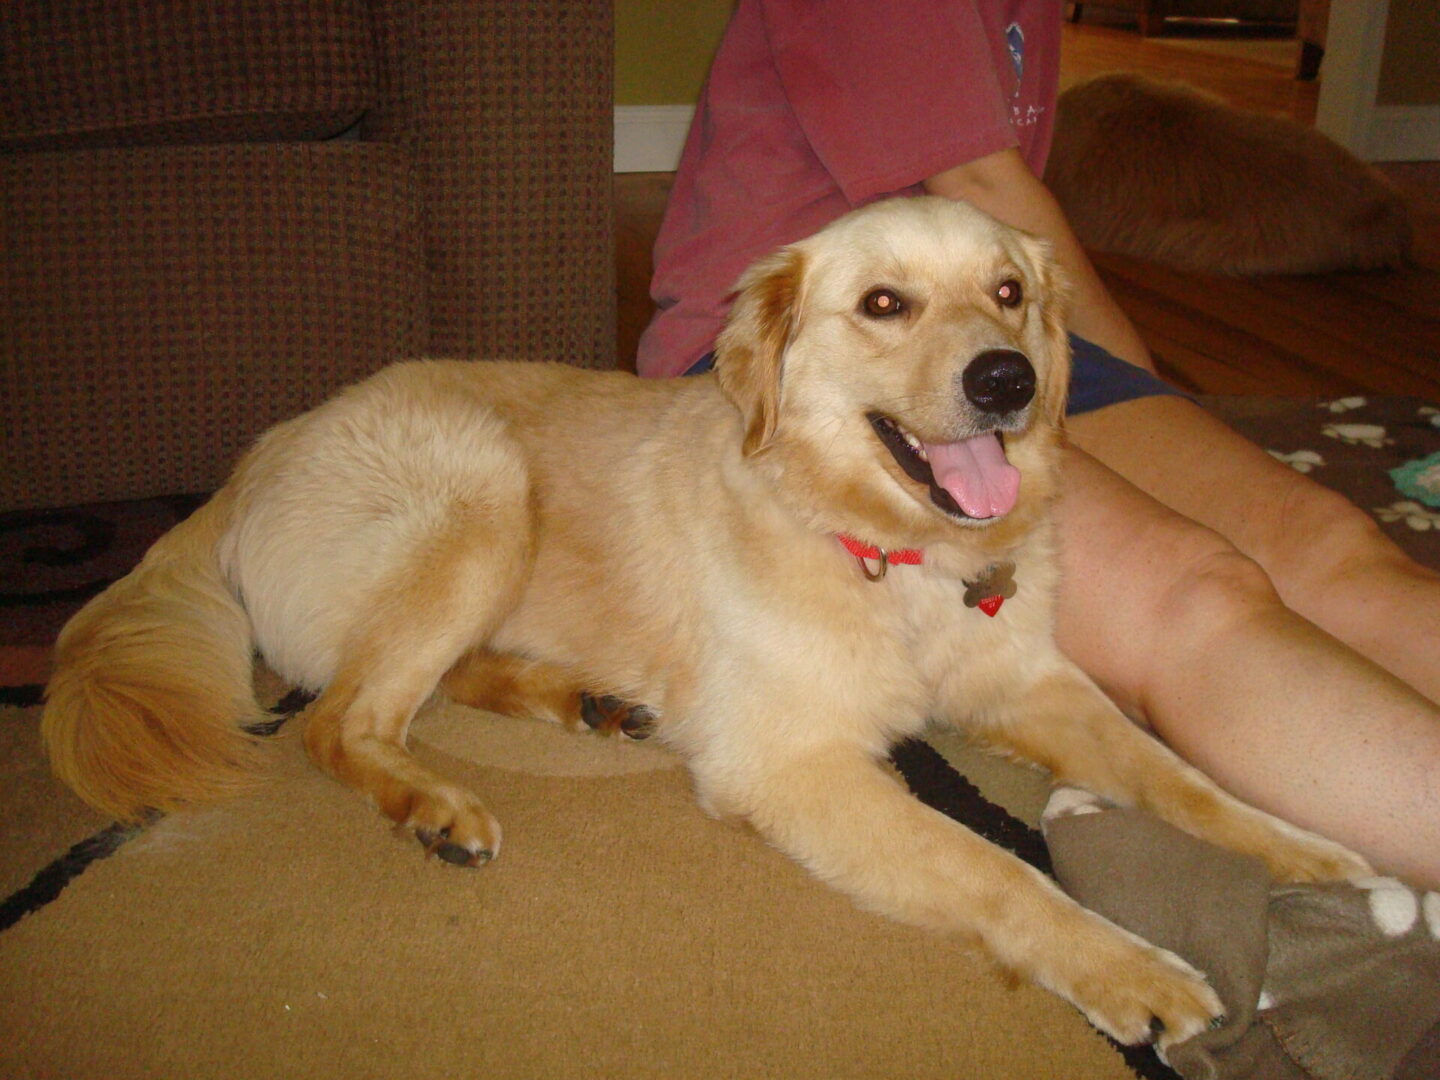 A golden dog with a red collar lying on a carpet near a person.